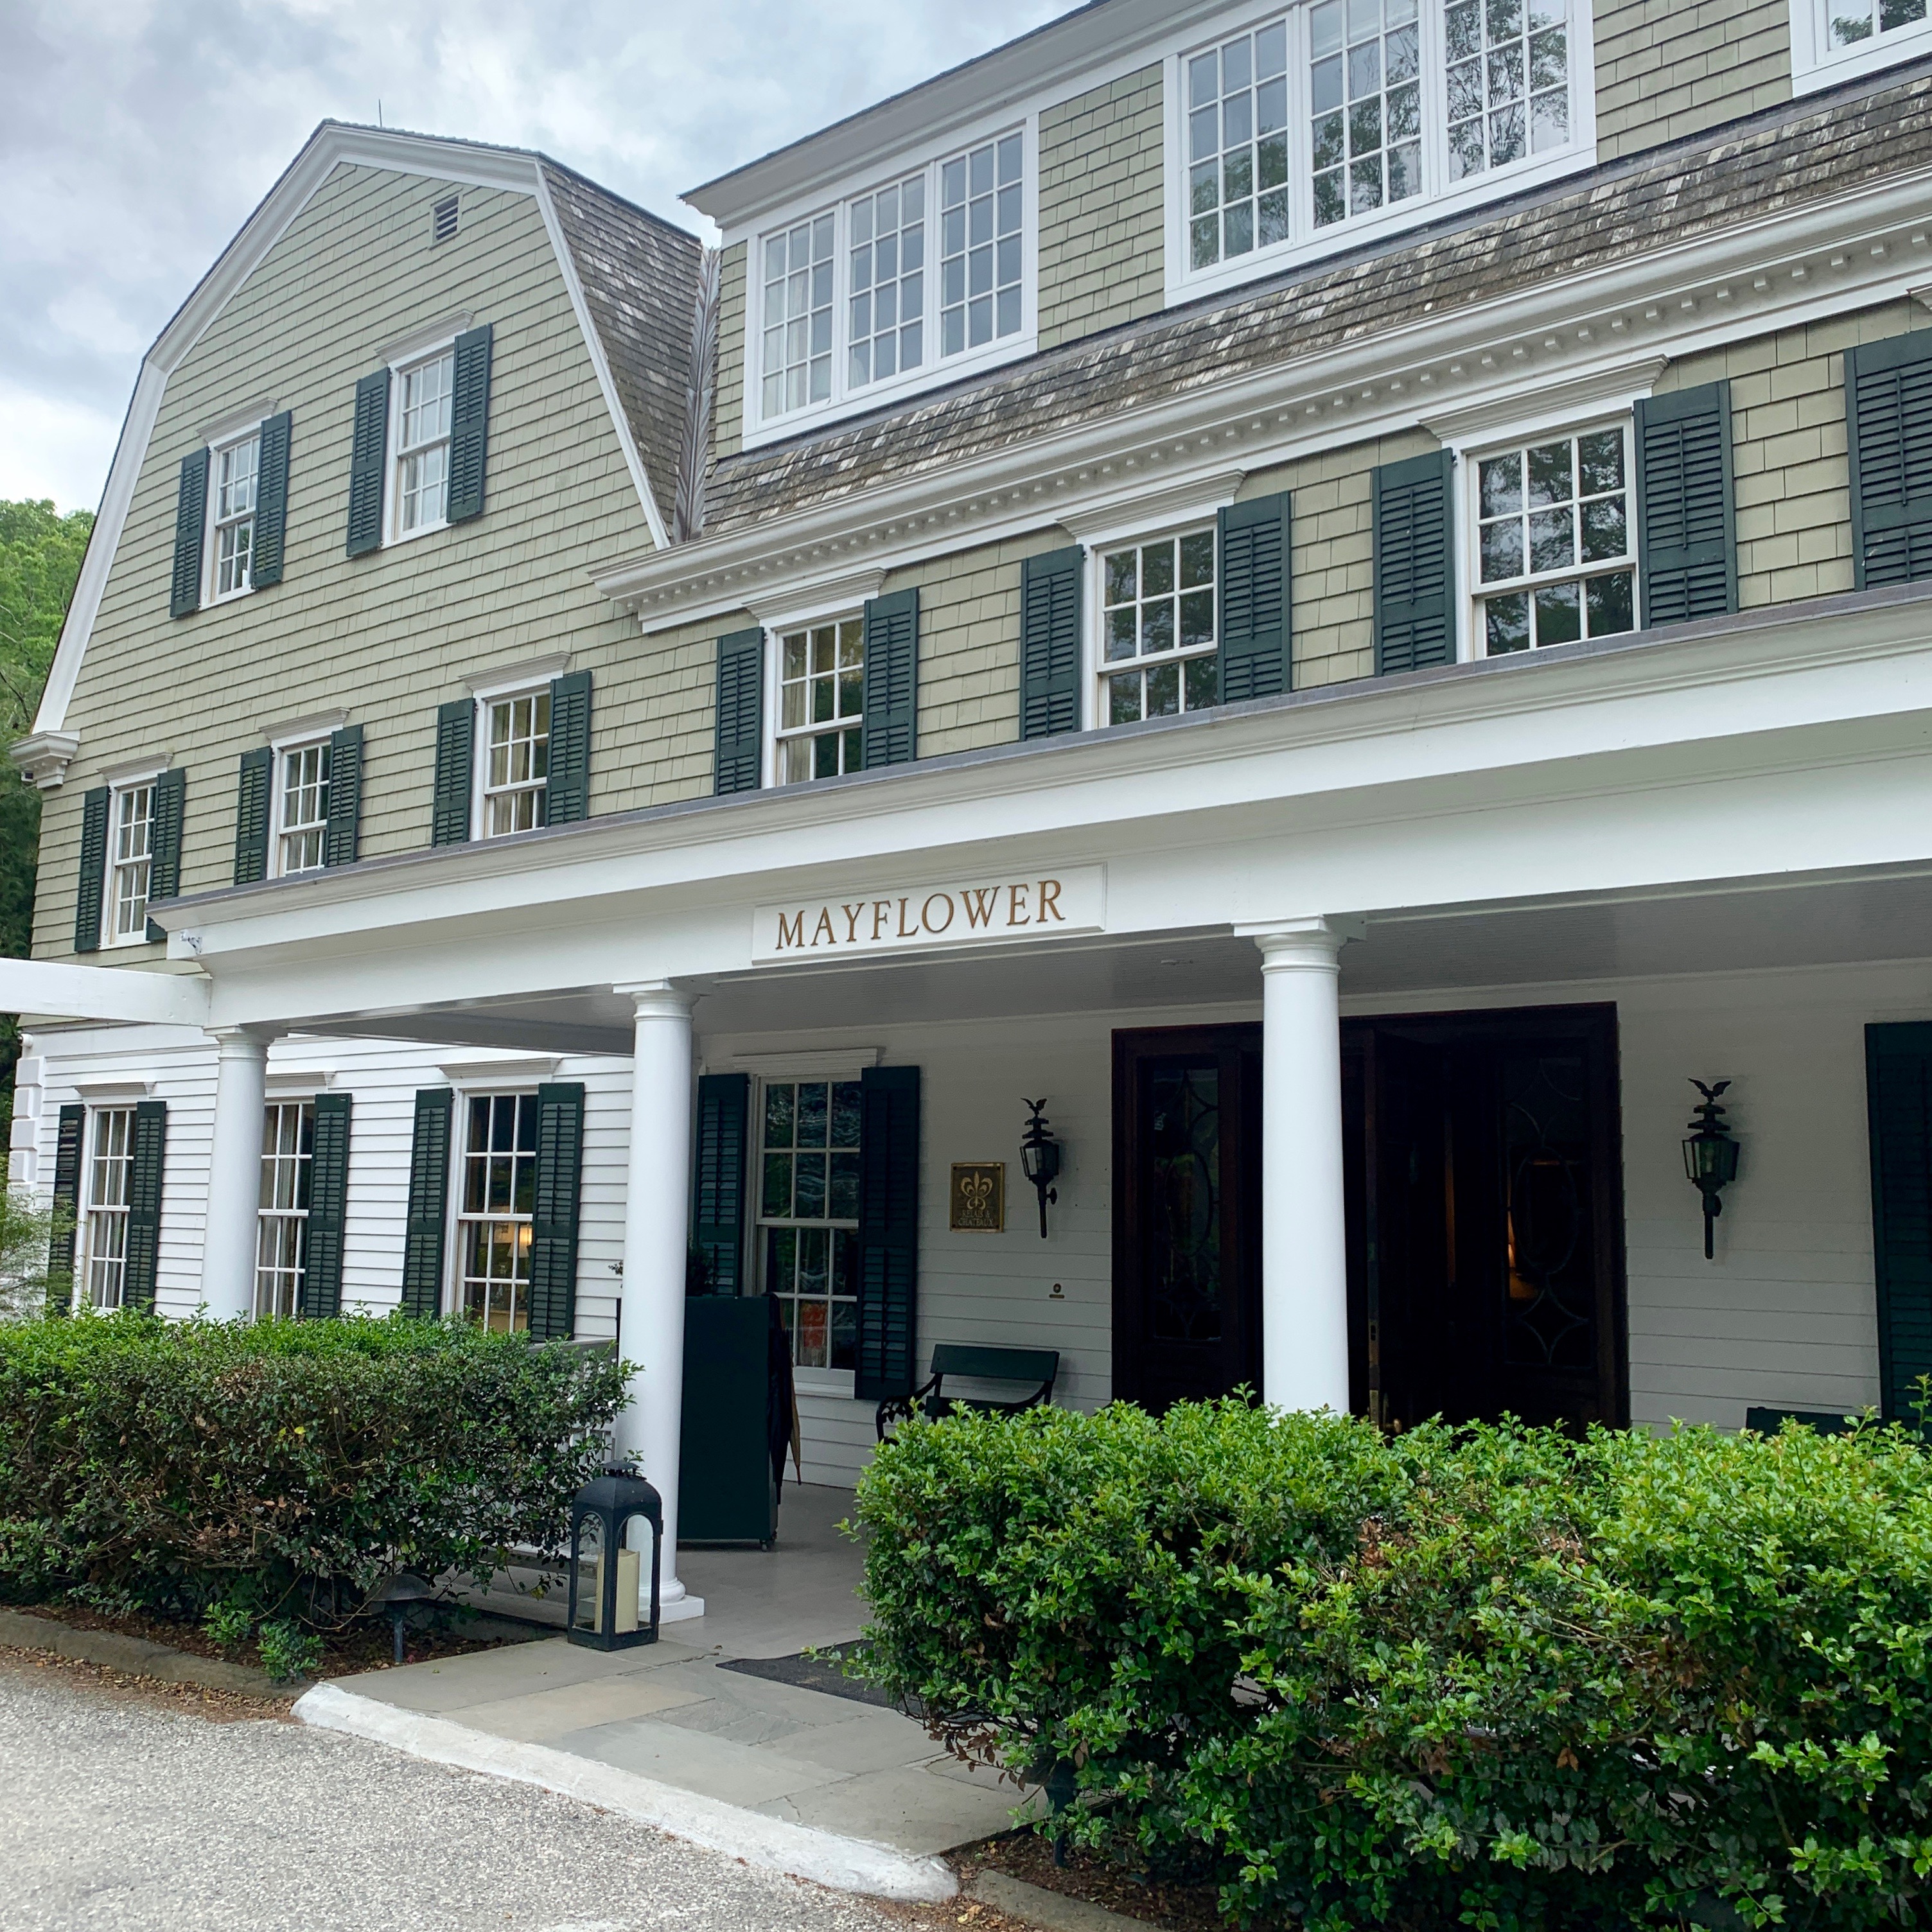 The Mayflower Inn & Spa Photo by The Potted Boxwood 9